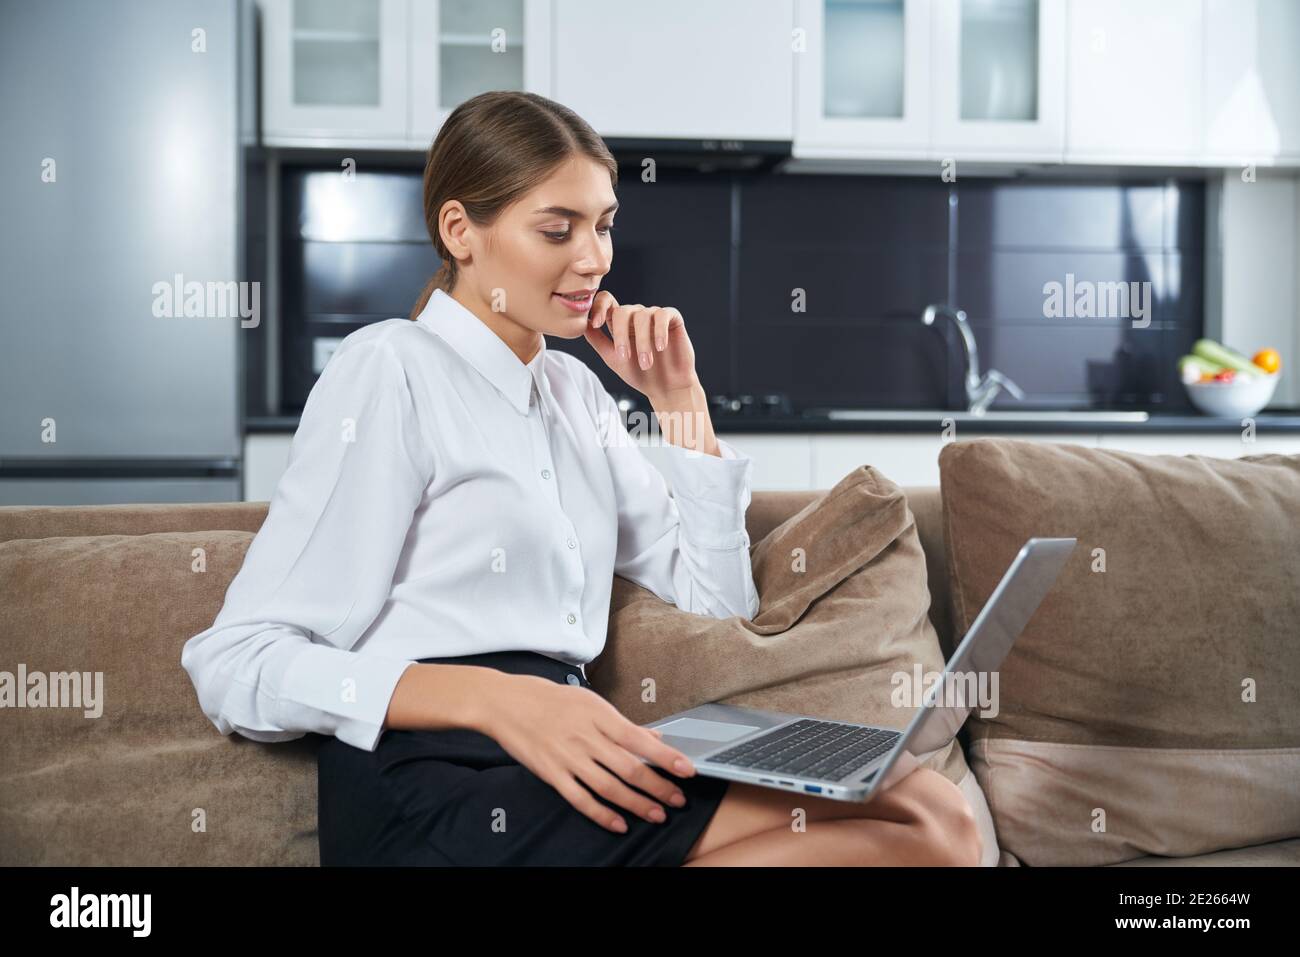 Smiling young lady relaxing on cozy sofa with portable laptop on knees. Attractive woman in white shirt looking at computer screen at home. Stock Photo